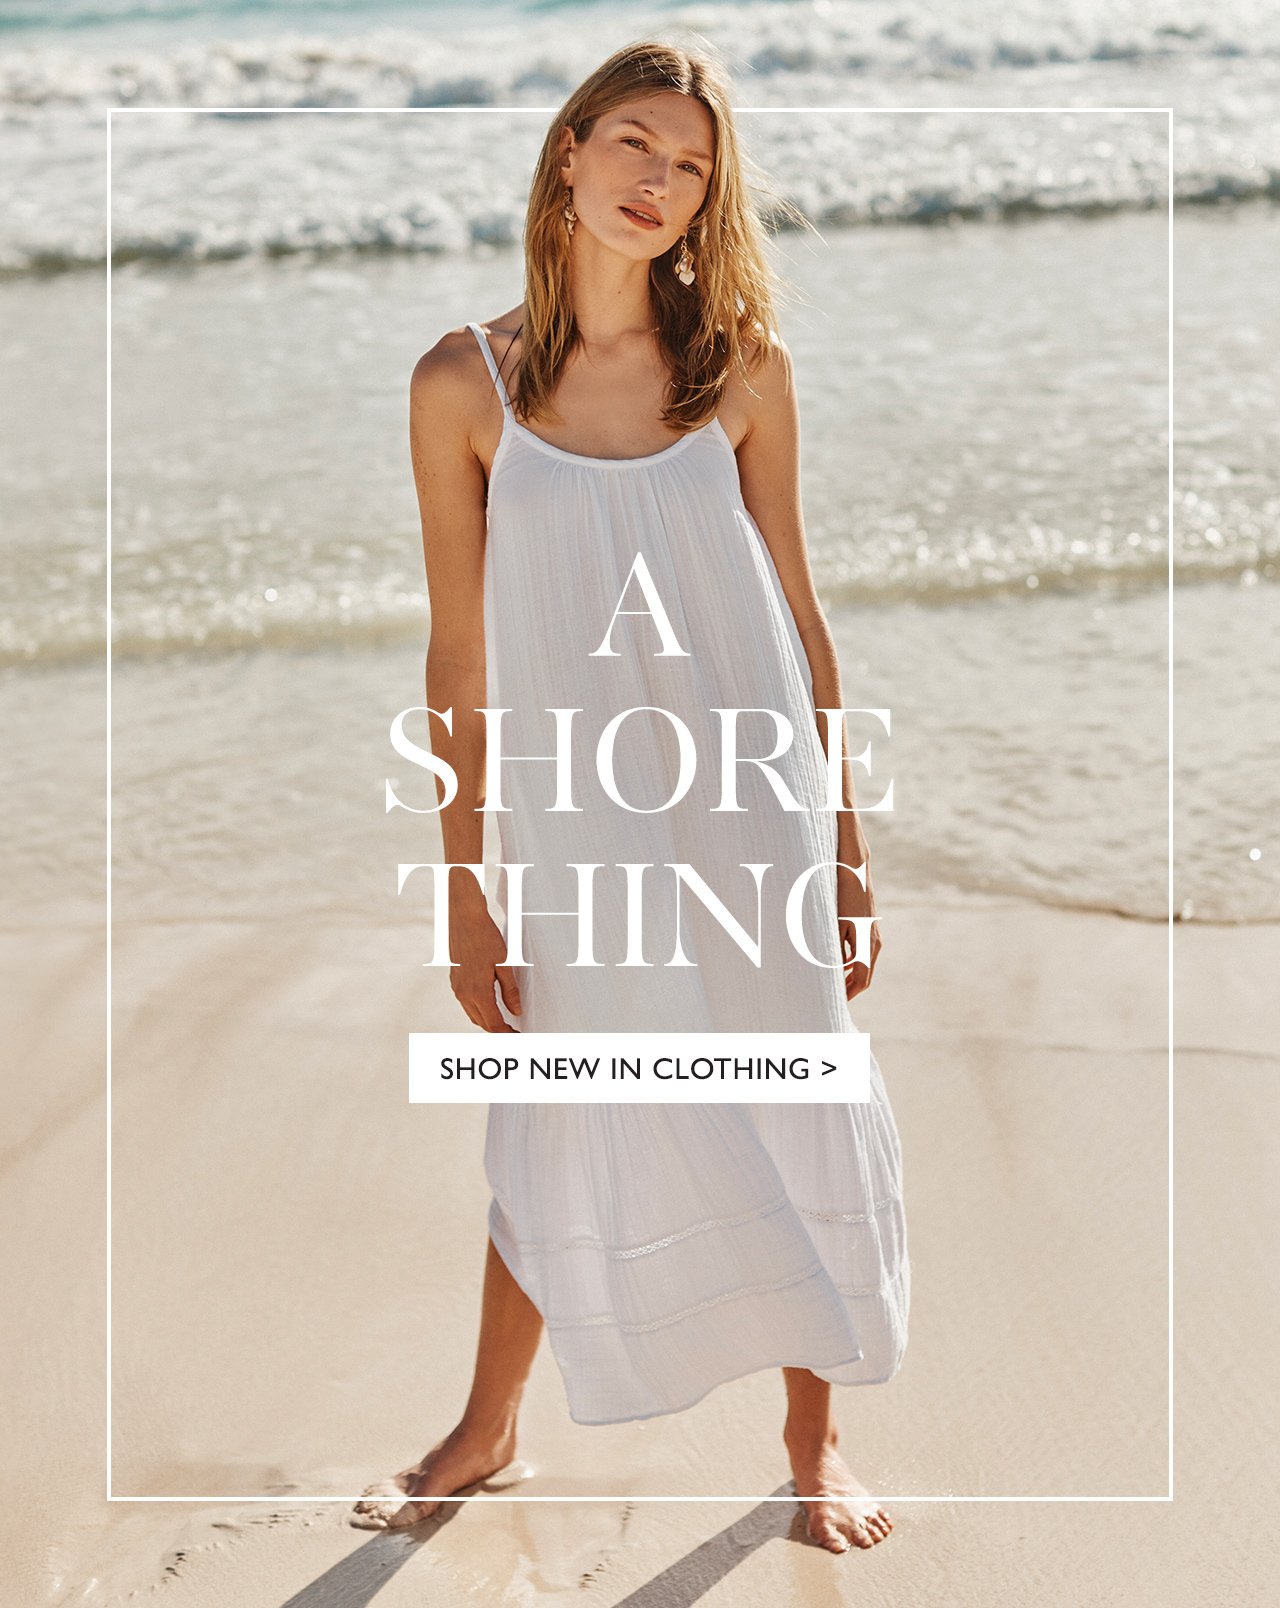 A Shore Thing Shop New In Clothing